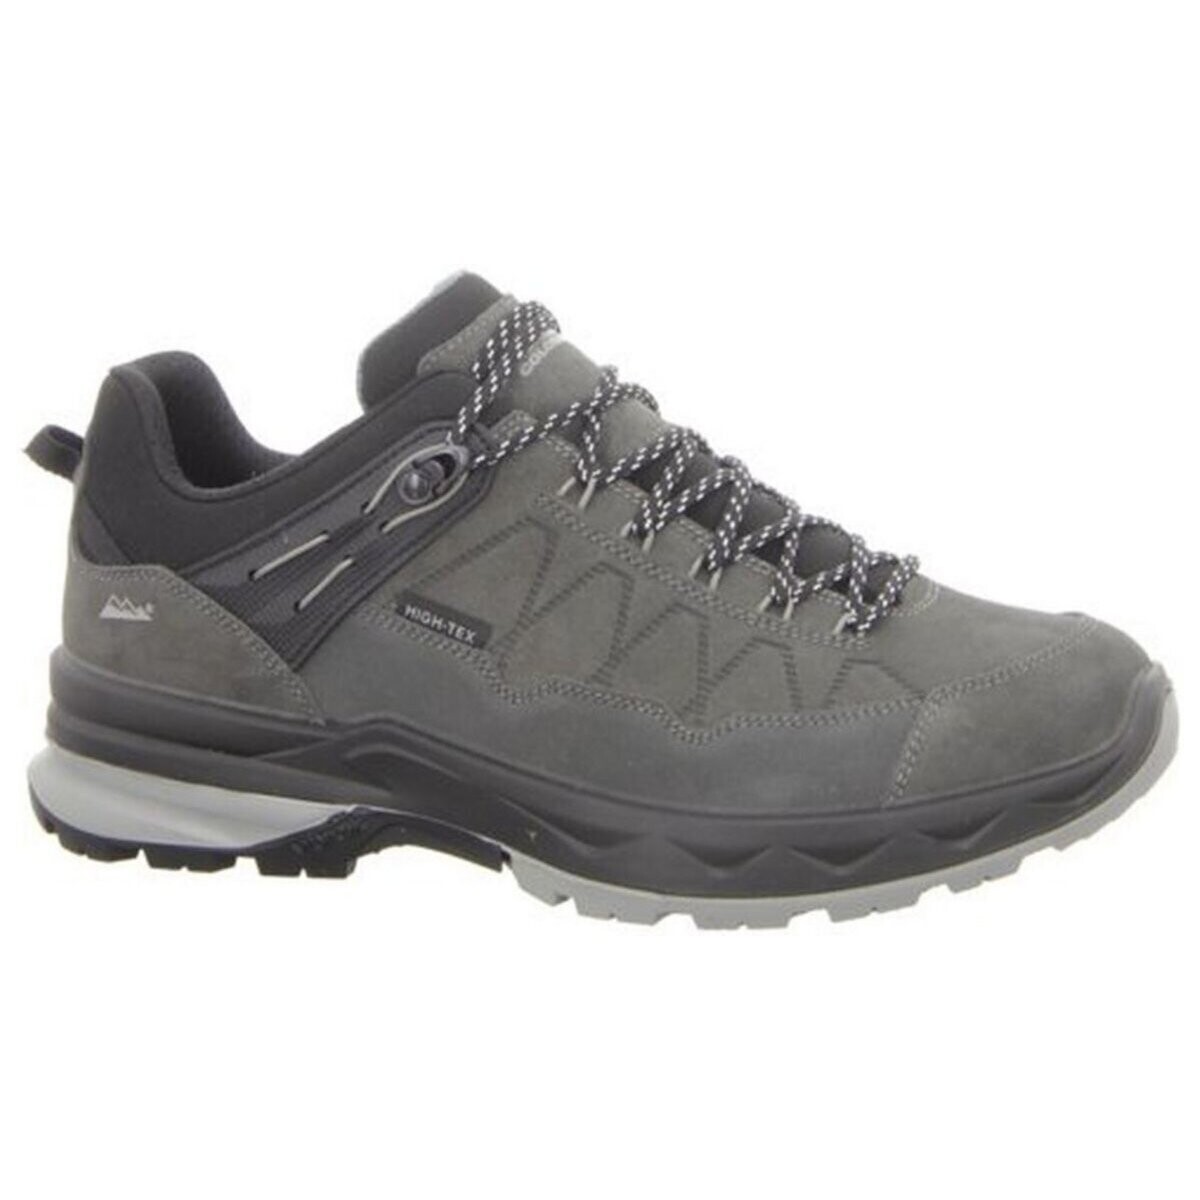 Chaussures Homme Fitness / Training High Colorado  Gris